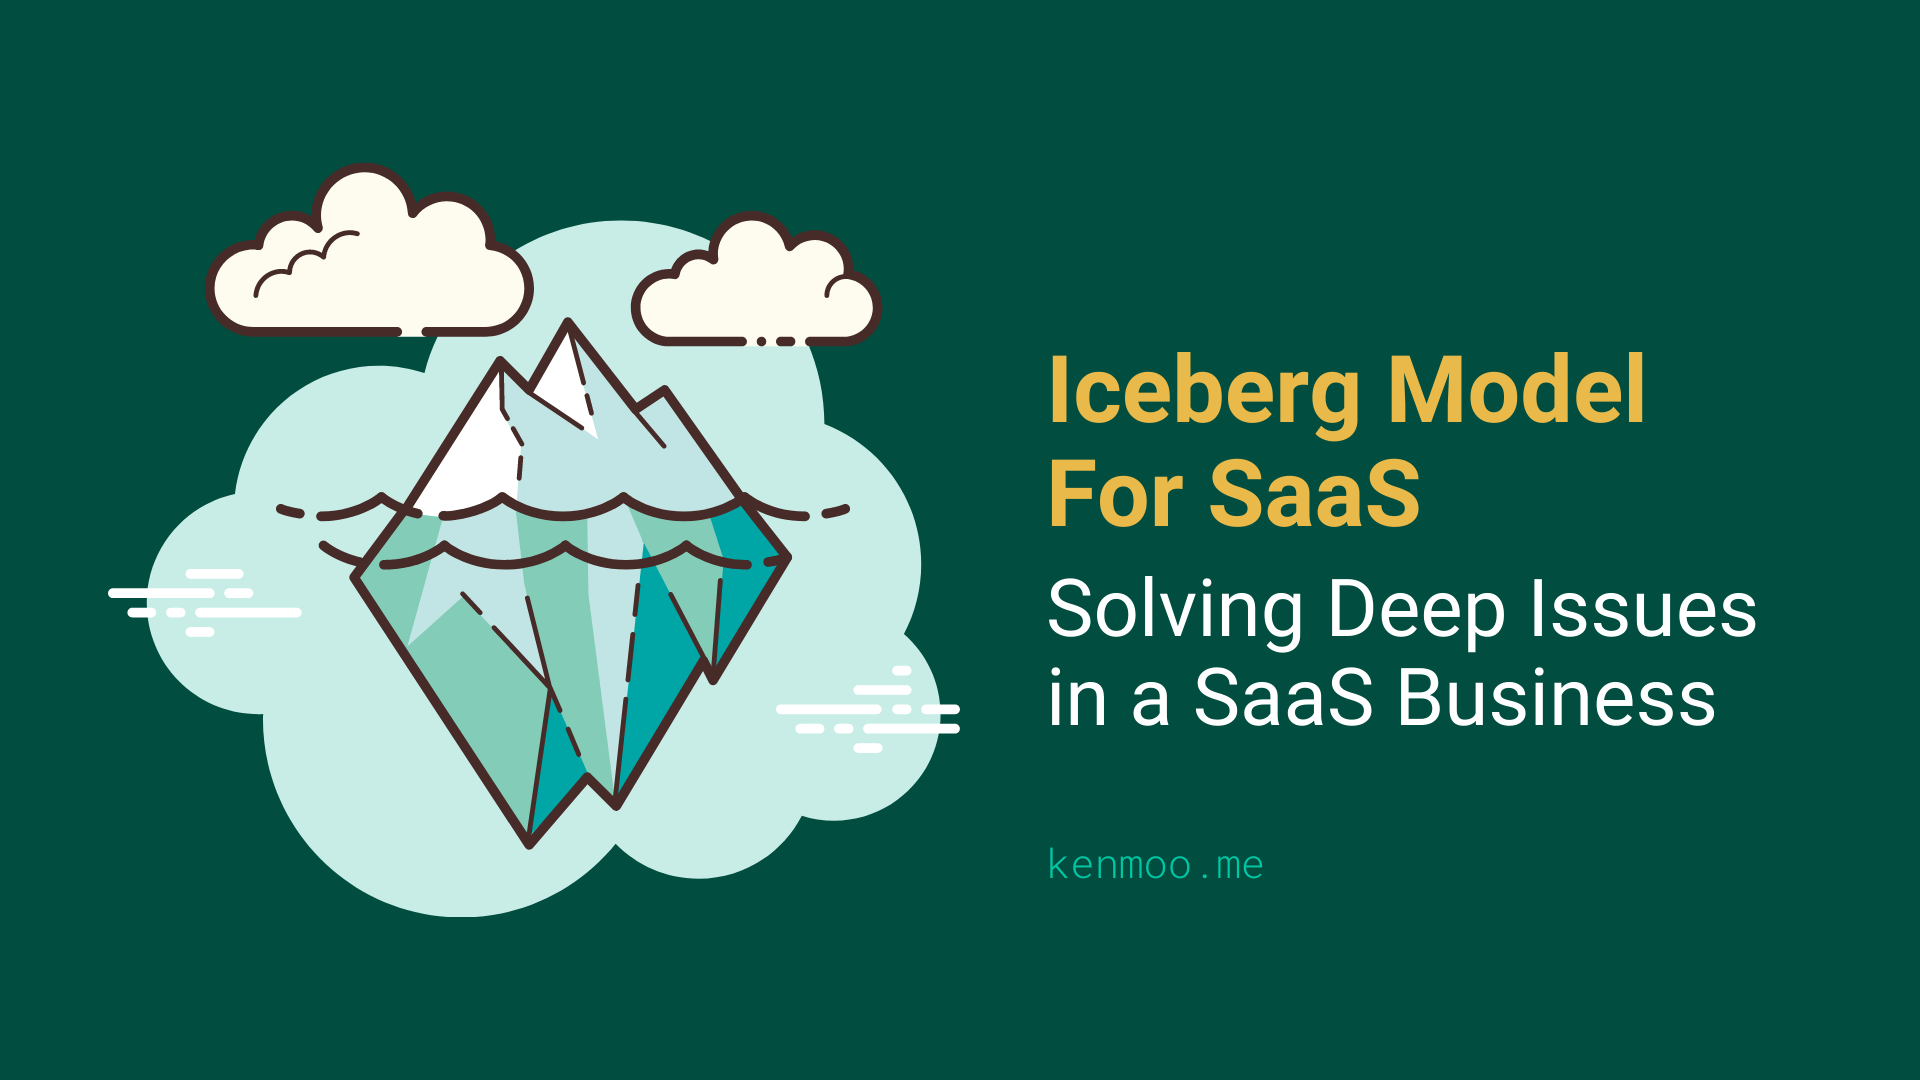 Iceberg Model: Solving Deep Issues in a SaaS Business